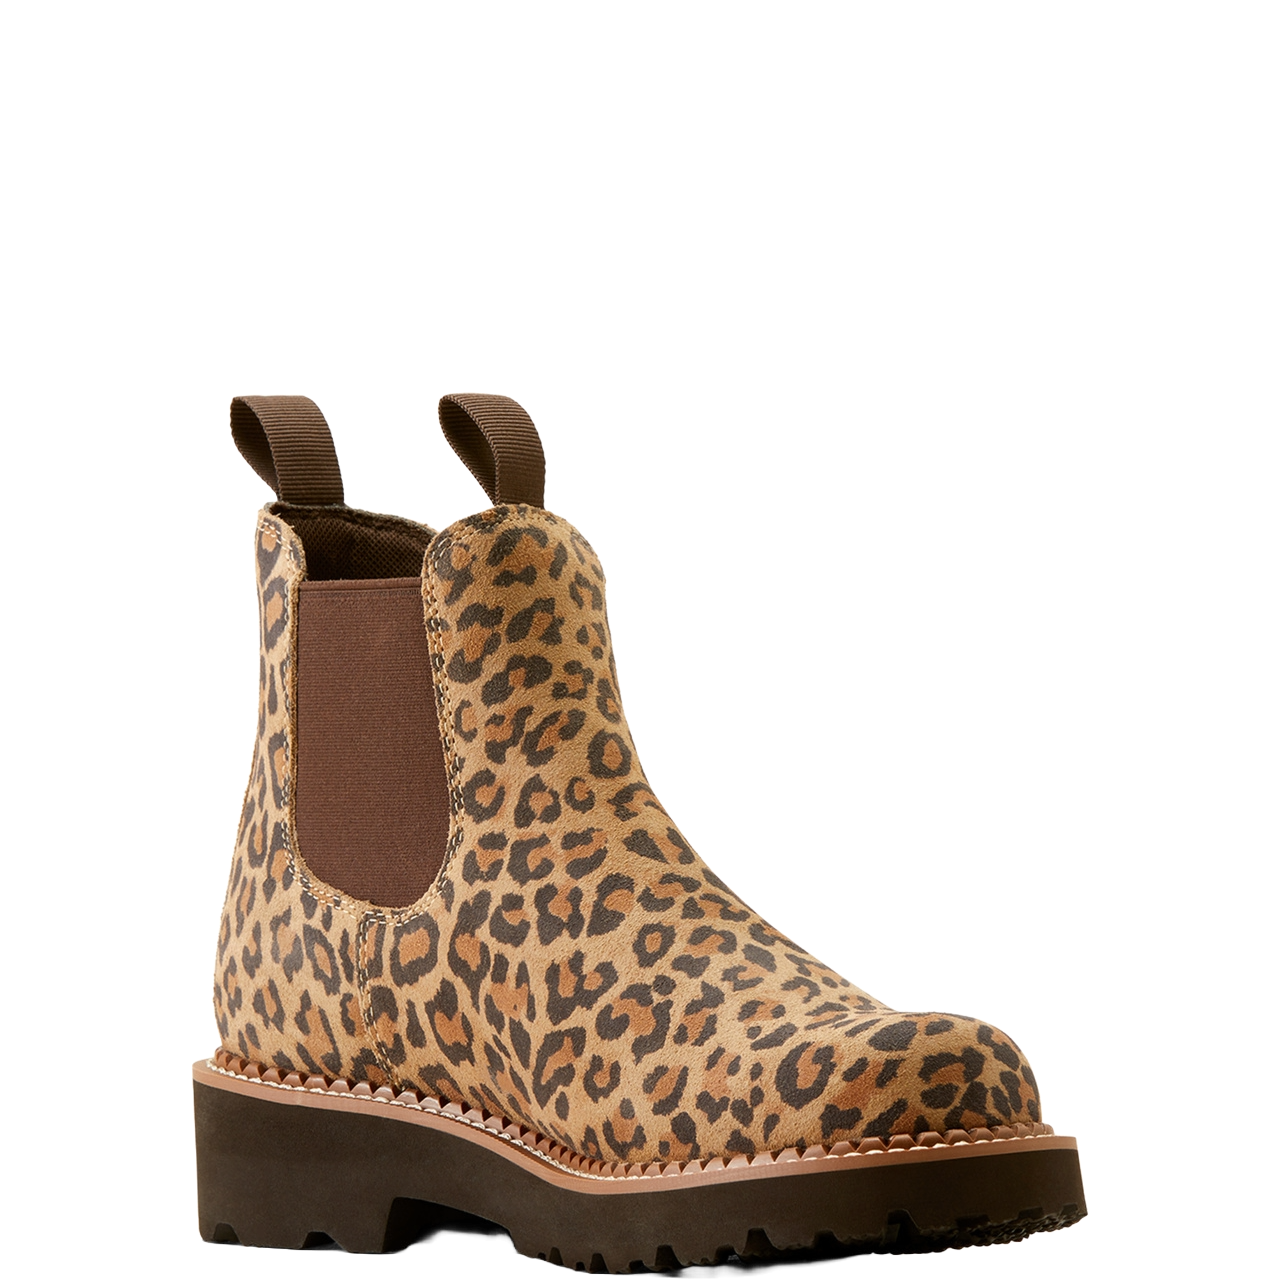 Ariat Ladies Fatbaby Twin Gore Cheetah Round Toe Boots 10050891